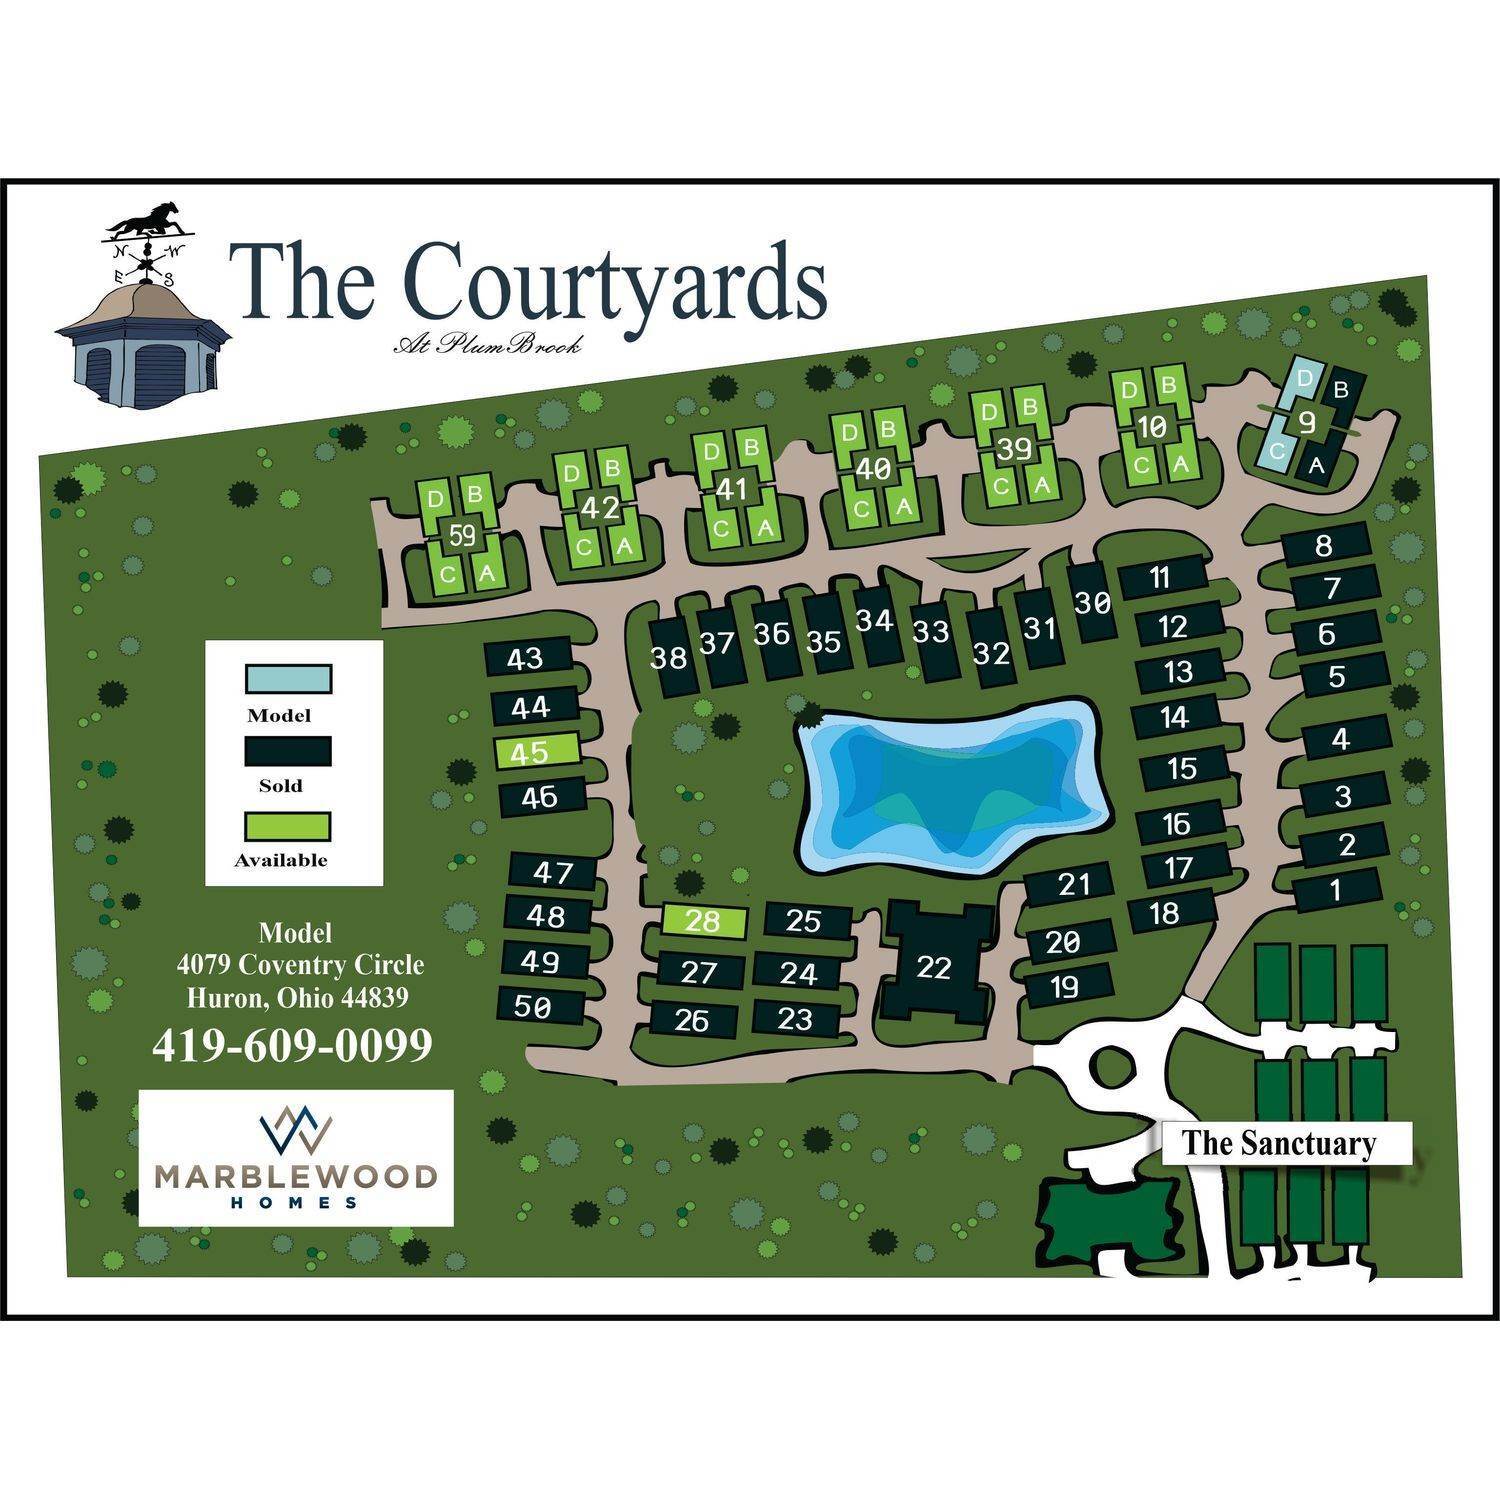 16. The Courtyards at Plum Brook建於 4079 Coventry Circle, Huron, OH 44839